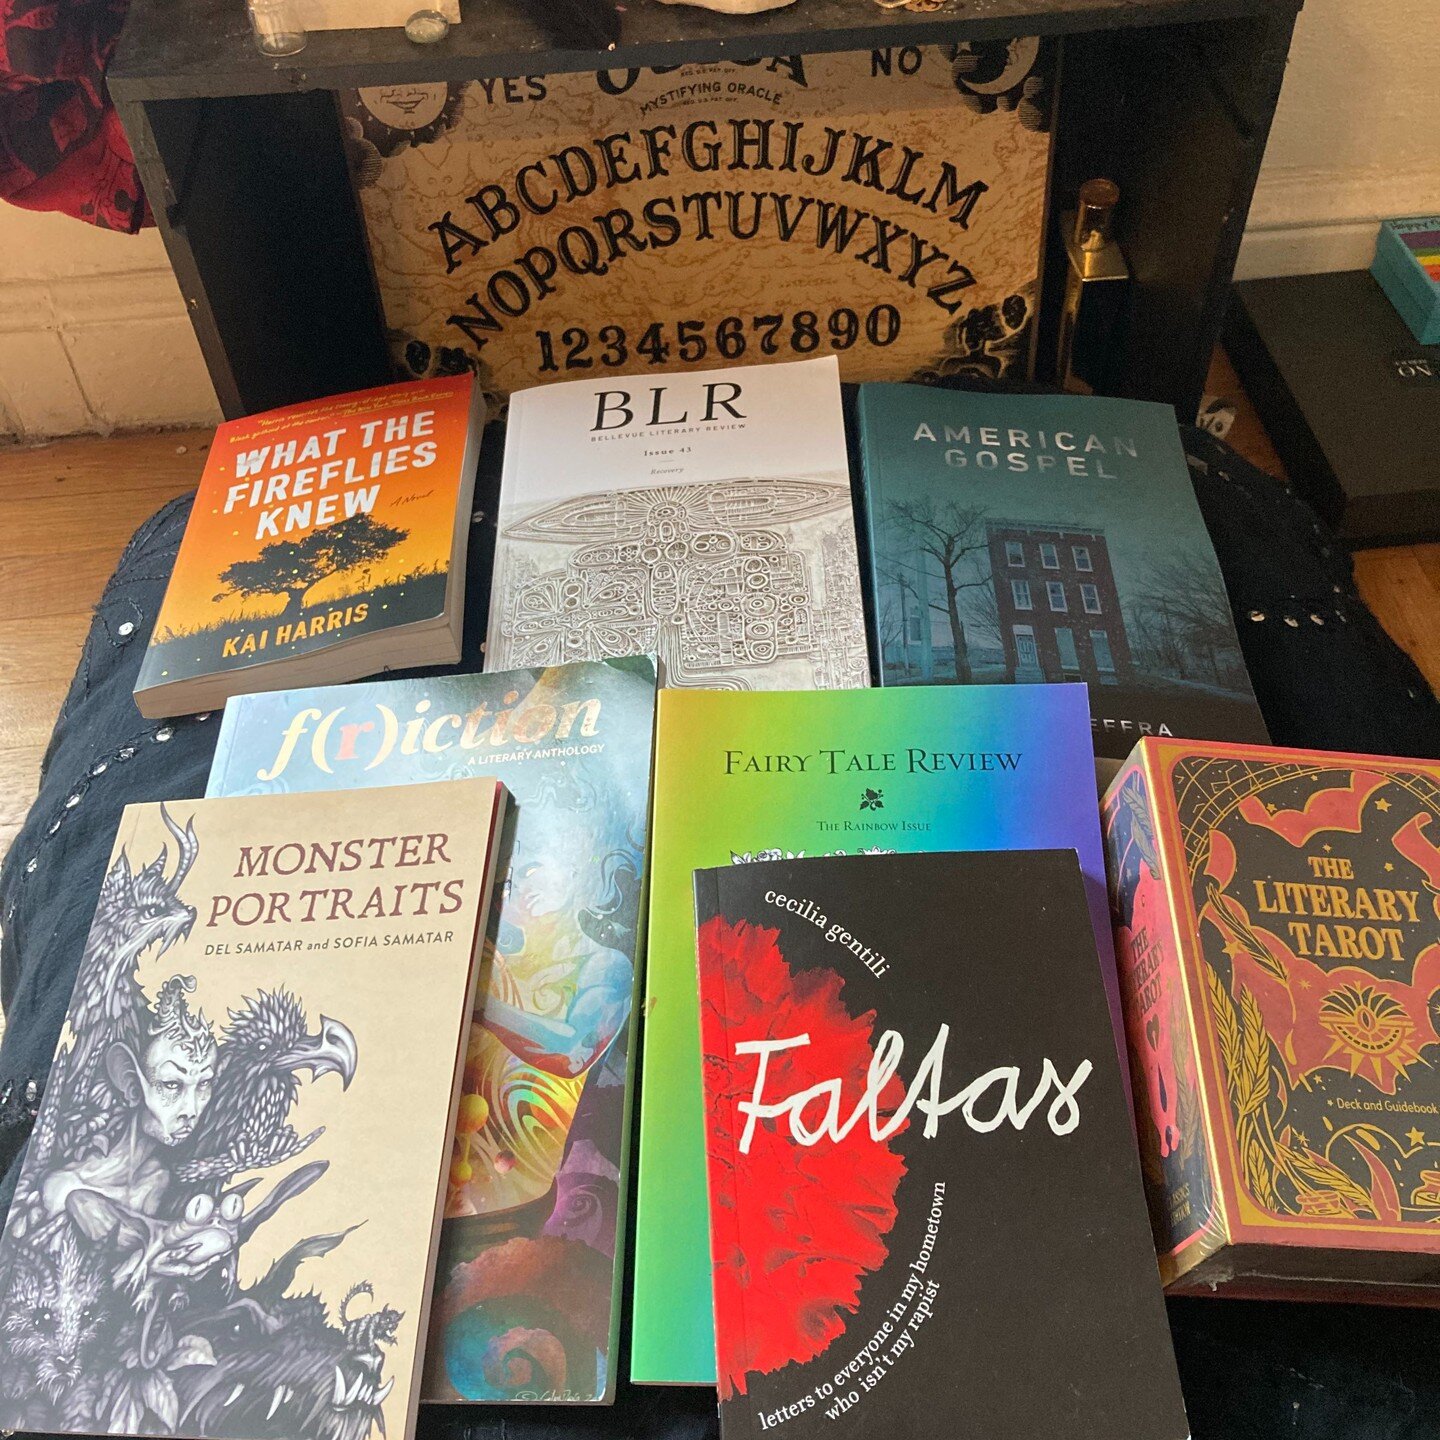 More love to come, but here are highlights from the book fair! 
@blreview Bellevue Literary Review is a magnificent journal I can't wait to dive into; look at @miahjeffra's new gorgeous, wonderful book out from @blacklawrencepress, @RoseMetalPress is